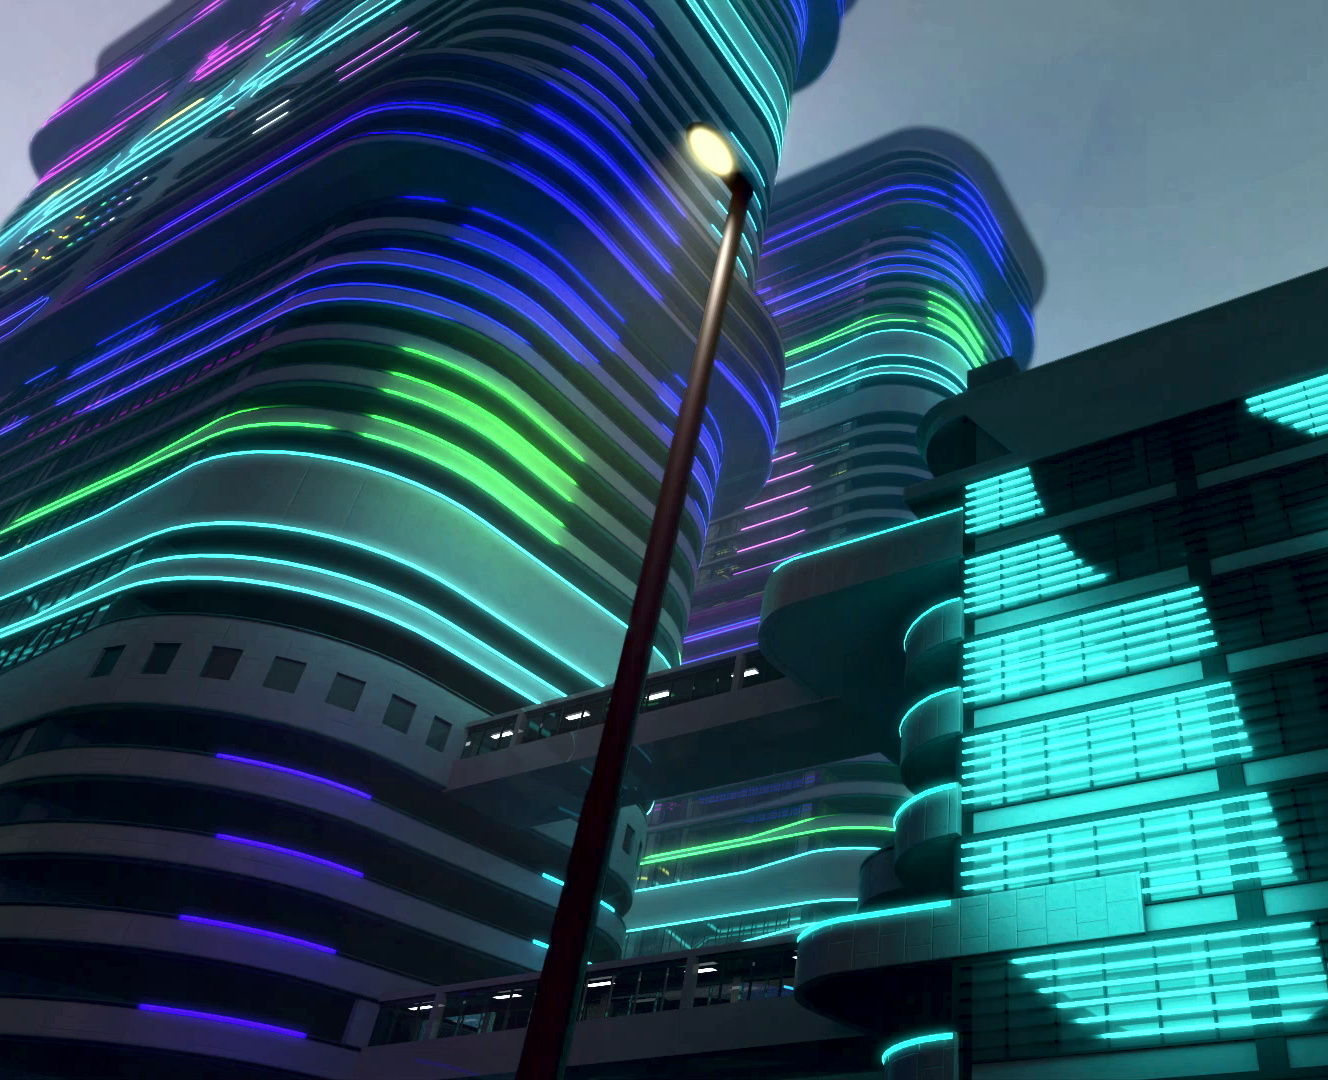 digitally created 3D concept image of a futuristic cityscape, using the Vista FLEX product from acdc Lighting - a still frame from the animated video